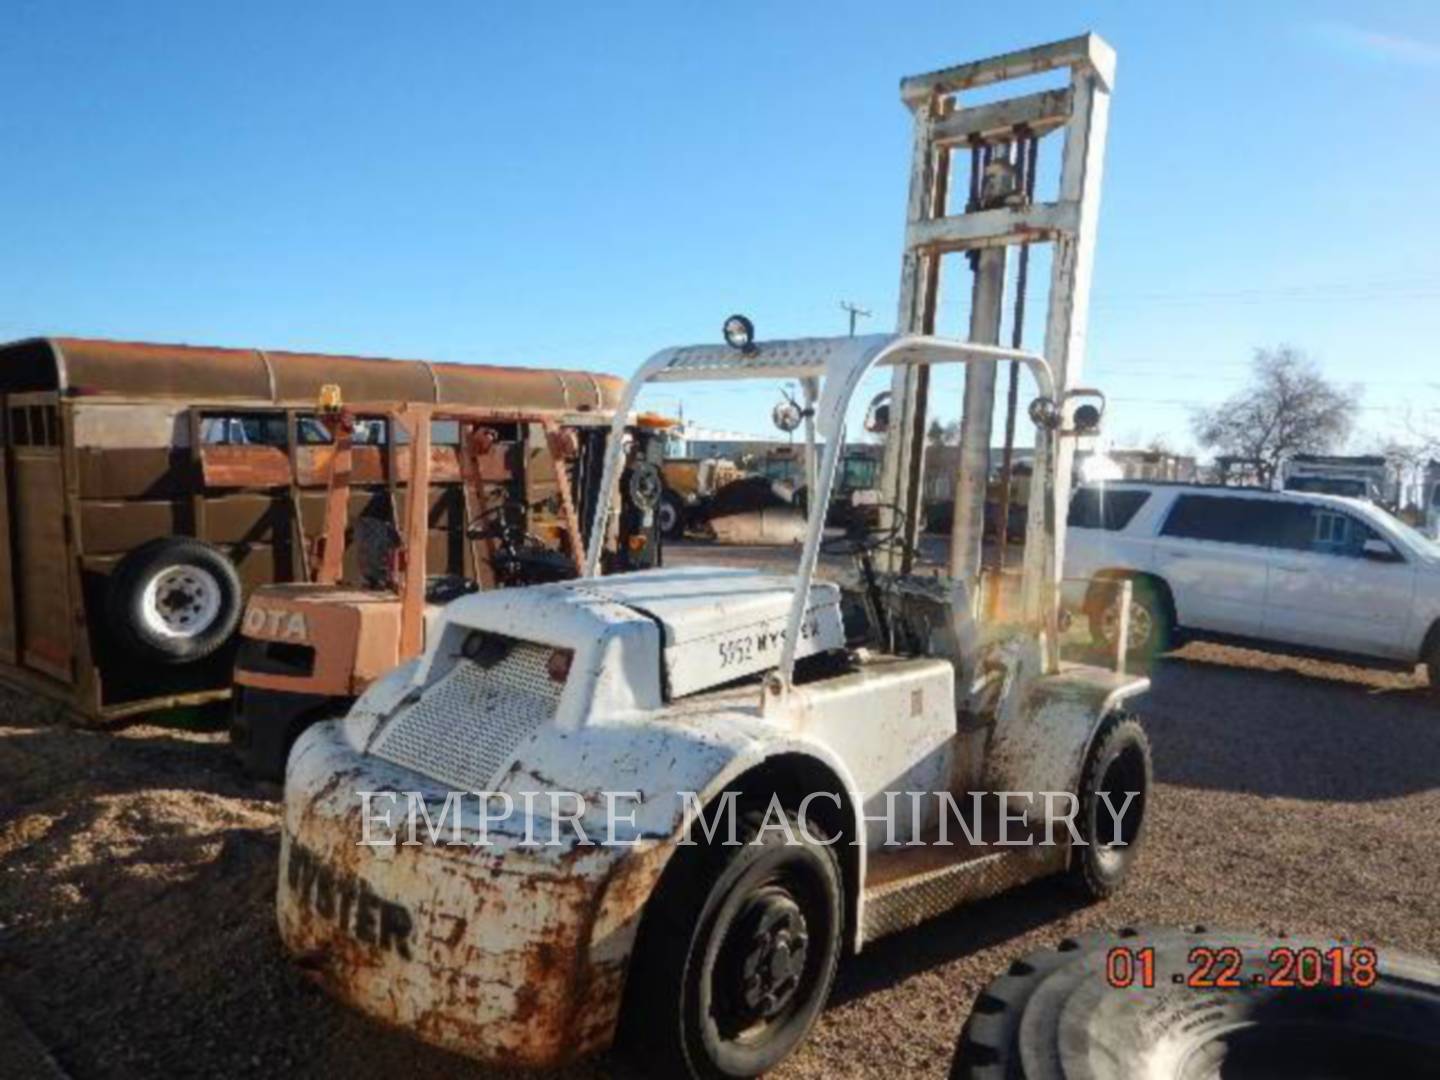 1999 Hyster Forklift Lift Truck For Sale In Mesa Az Ironsearch